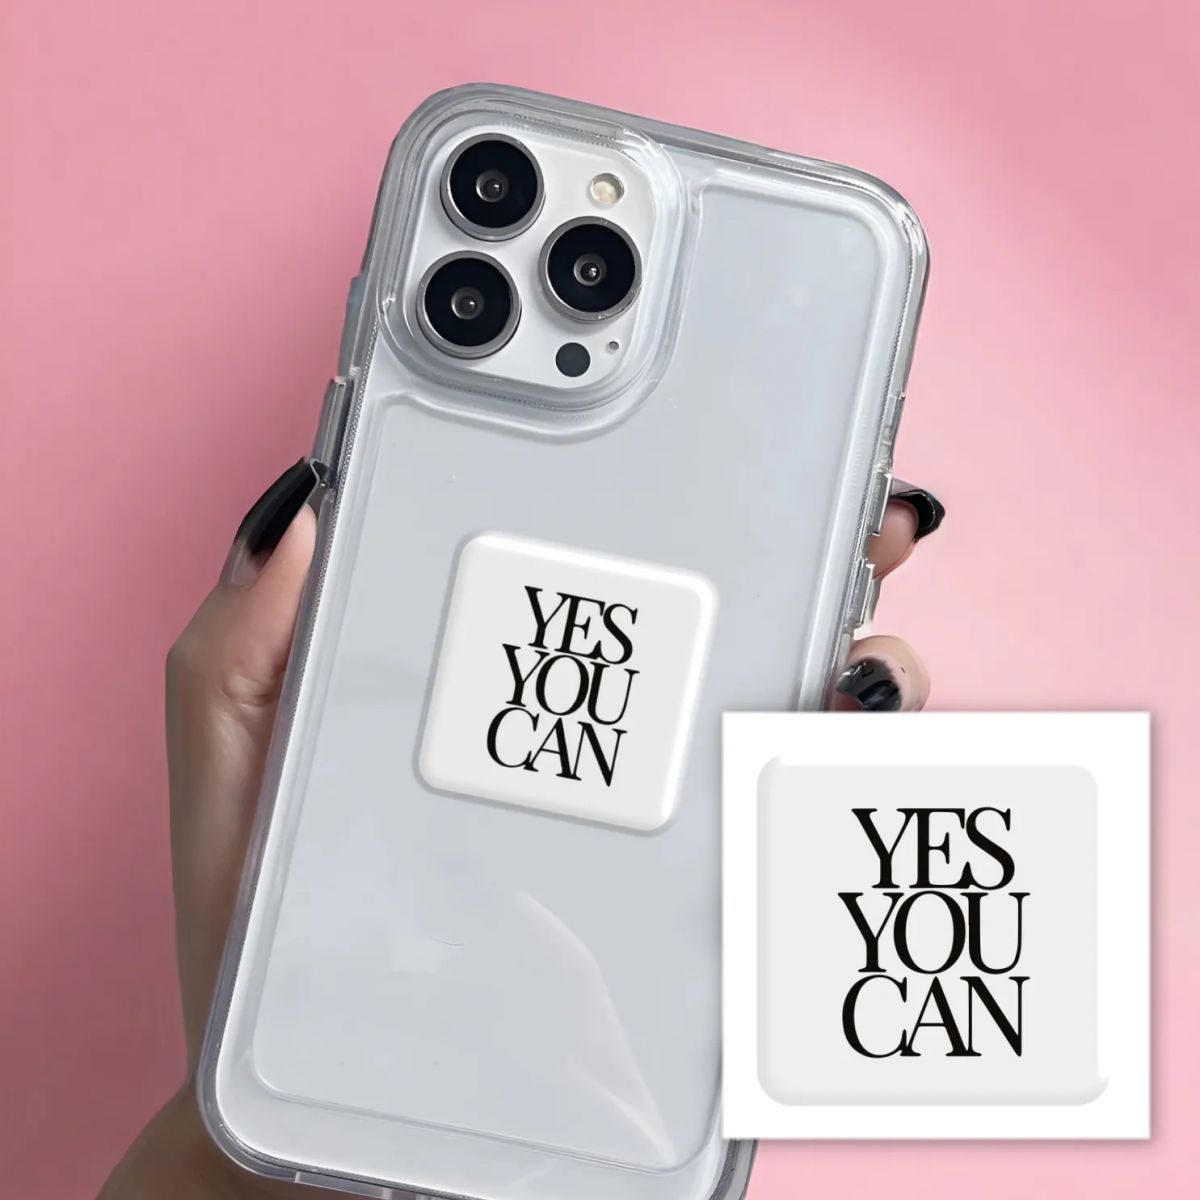 3D стикер "Yes, you can" (цена за 1 шт)